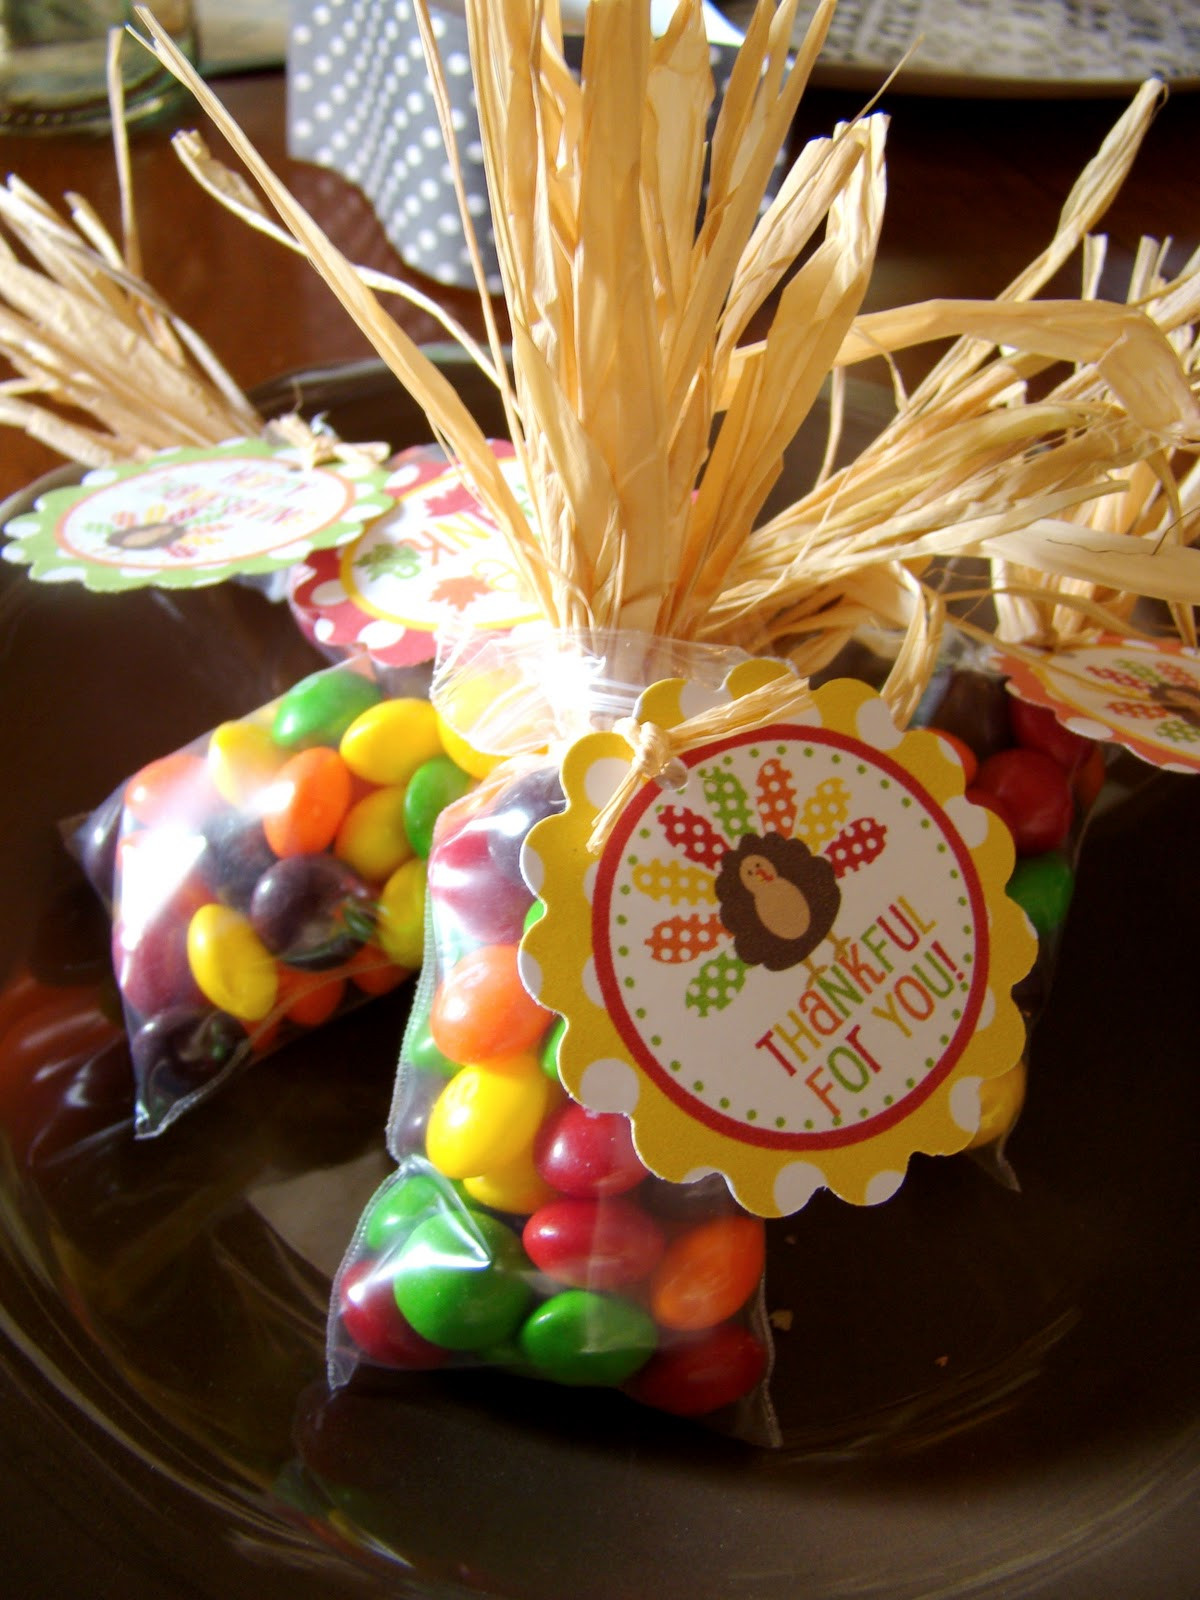 Gift For Thanksgiving
 tHe fiCkLe piCkLe InDiAn cORn favOrs and MaYfLoweR MuffiNs